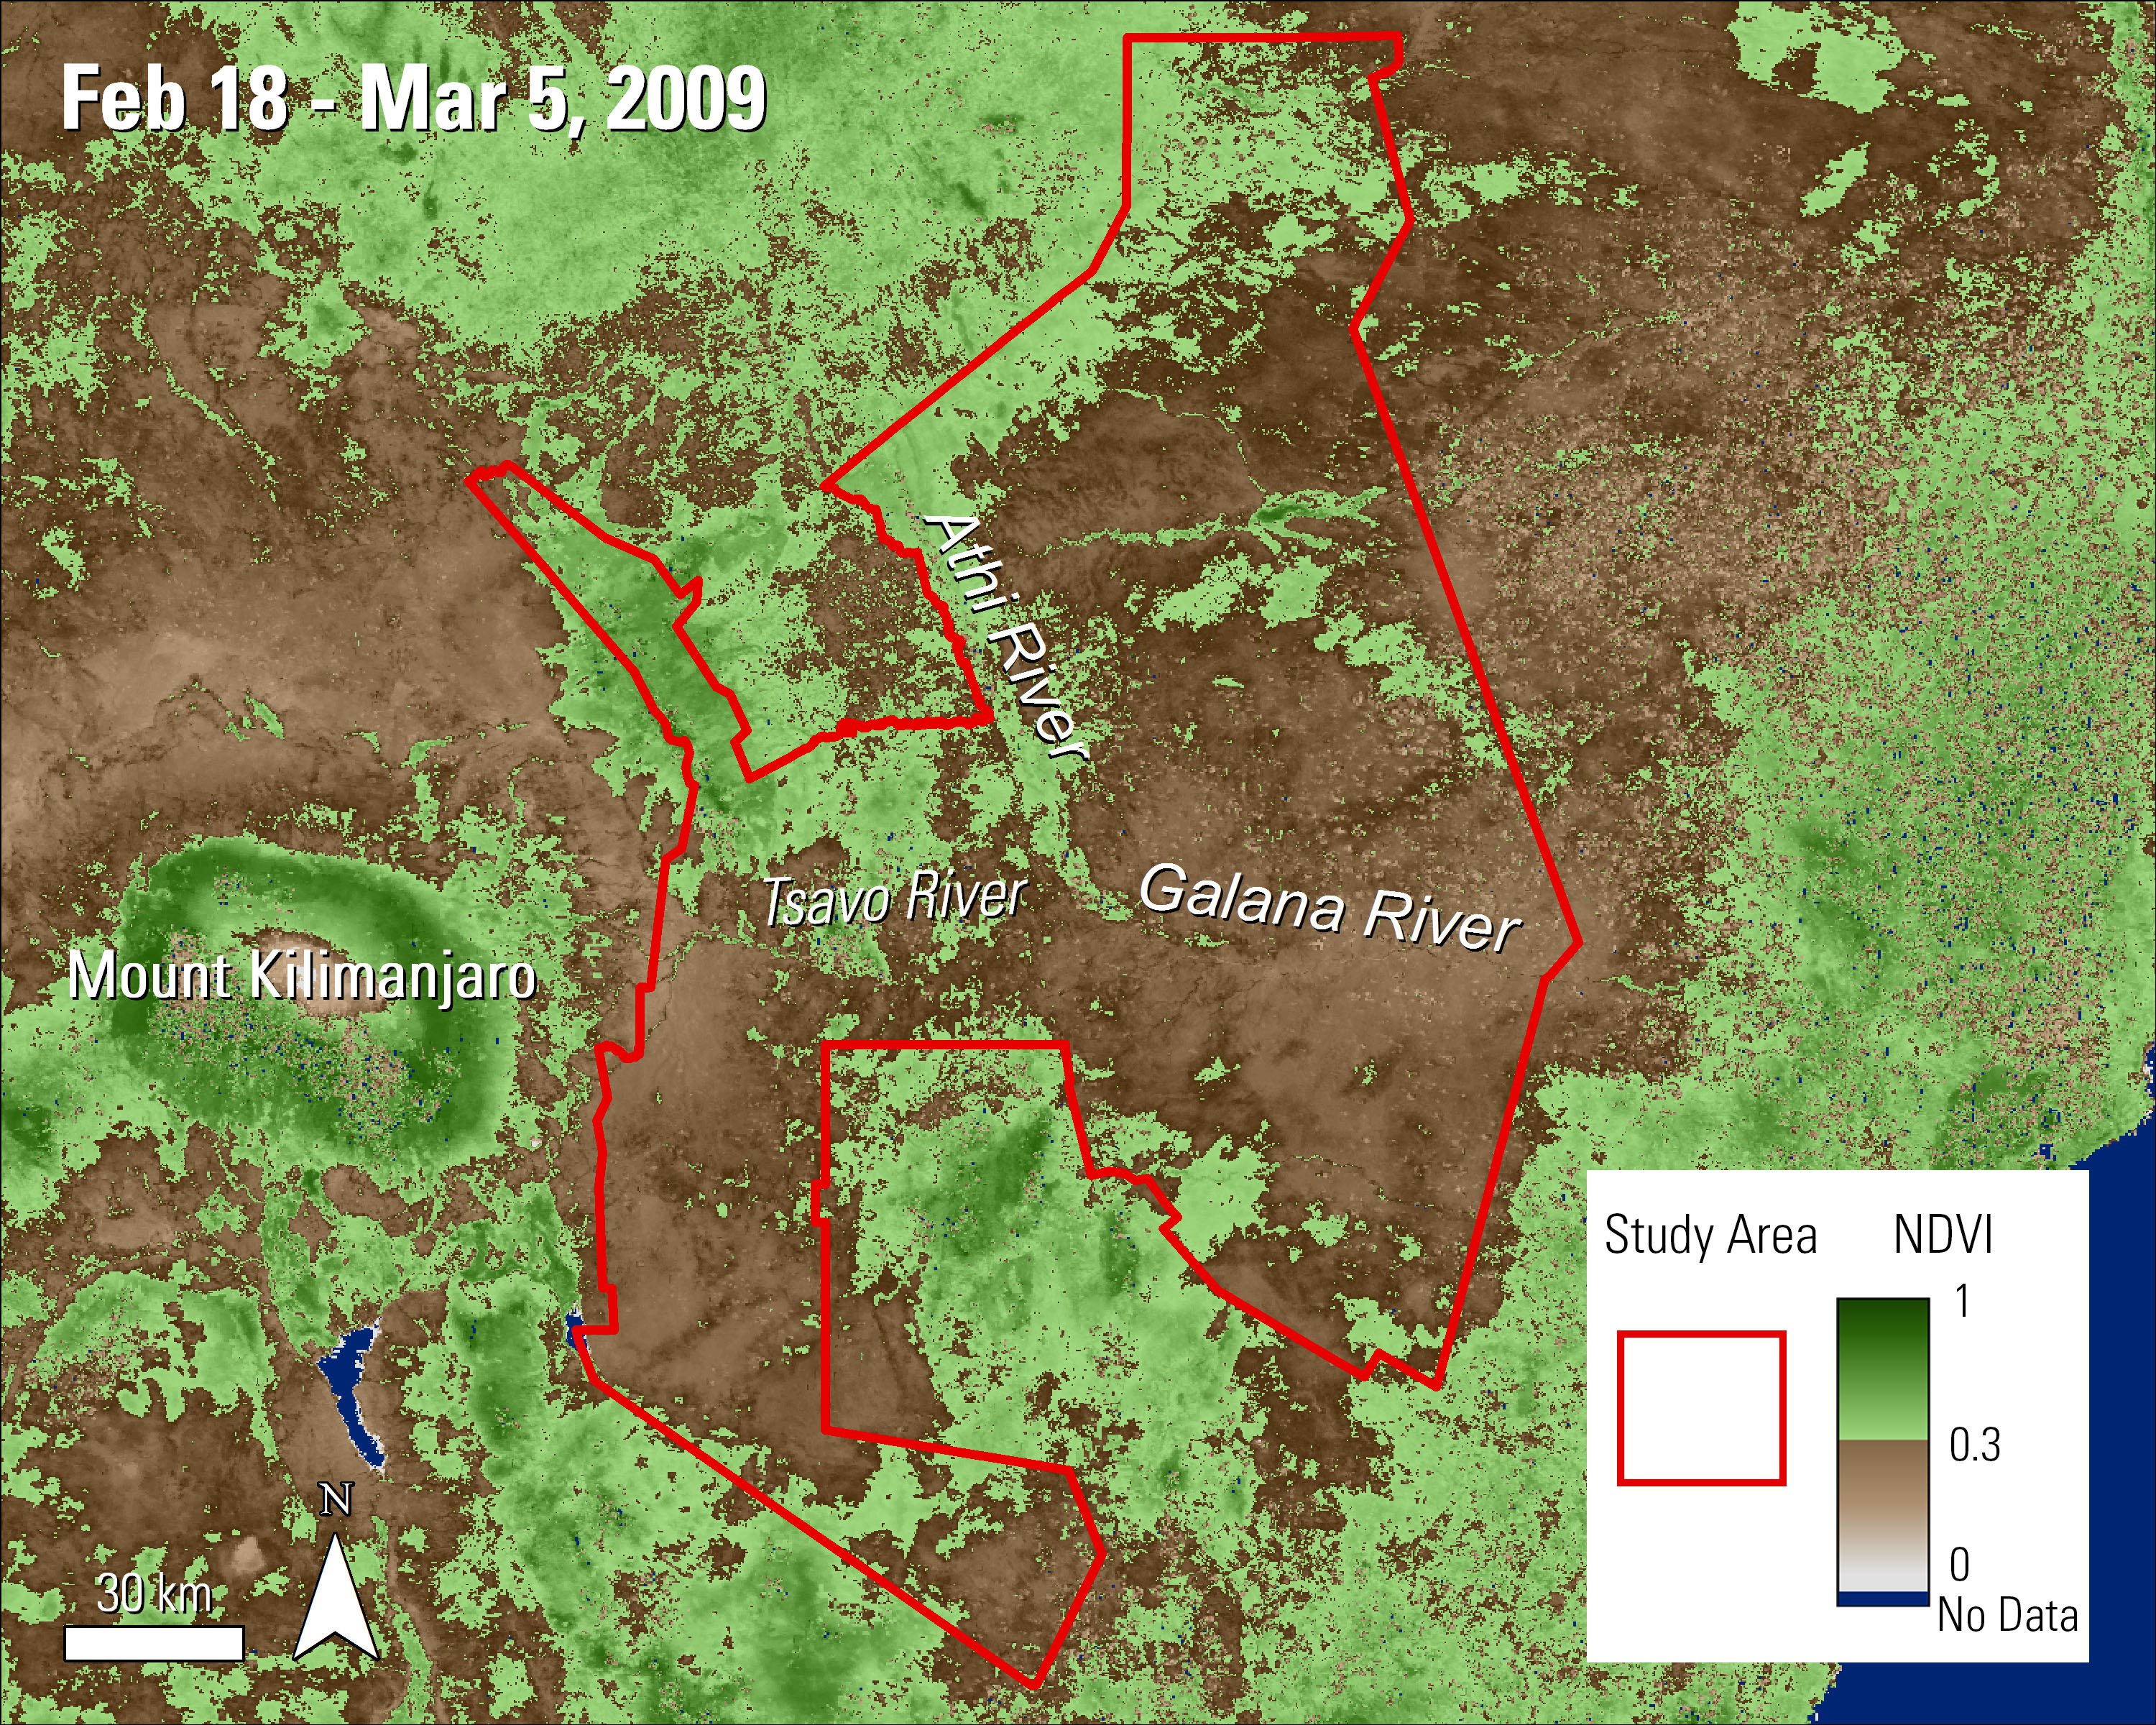 Terra MODIS NDVI data over the Tsavo Conservation Area in Kenya during February and March 2009.